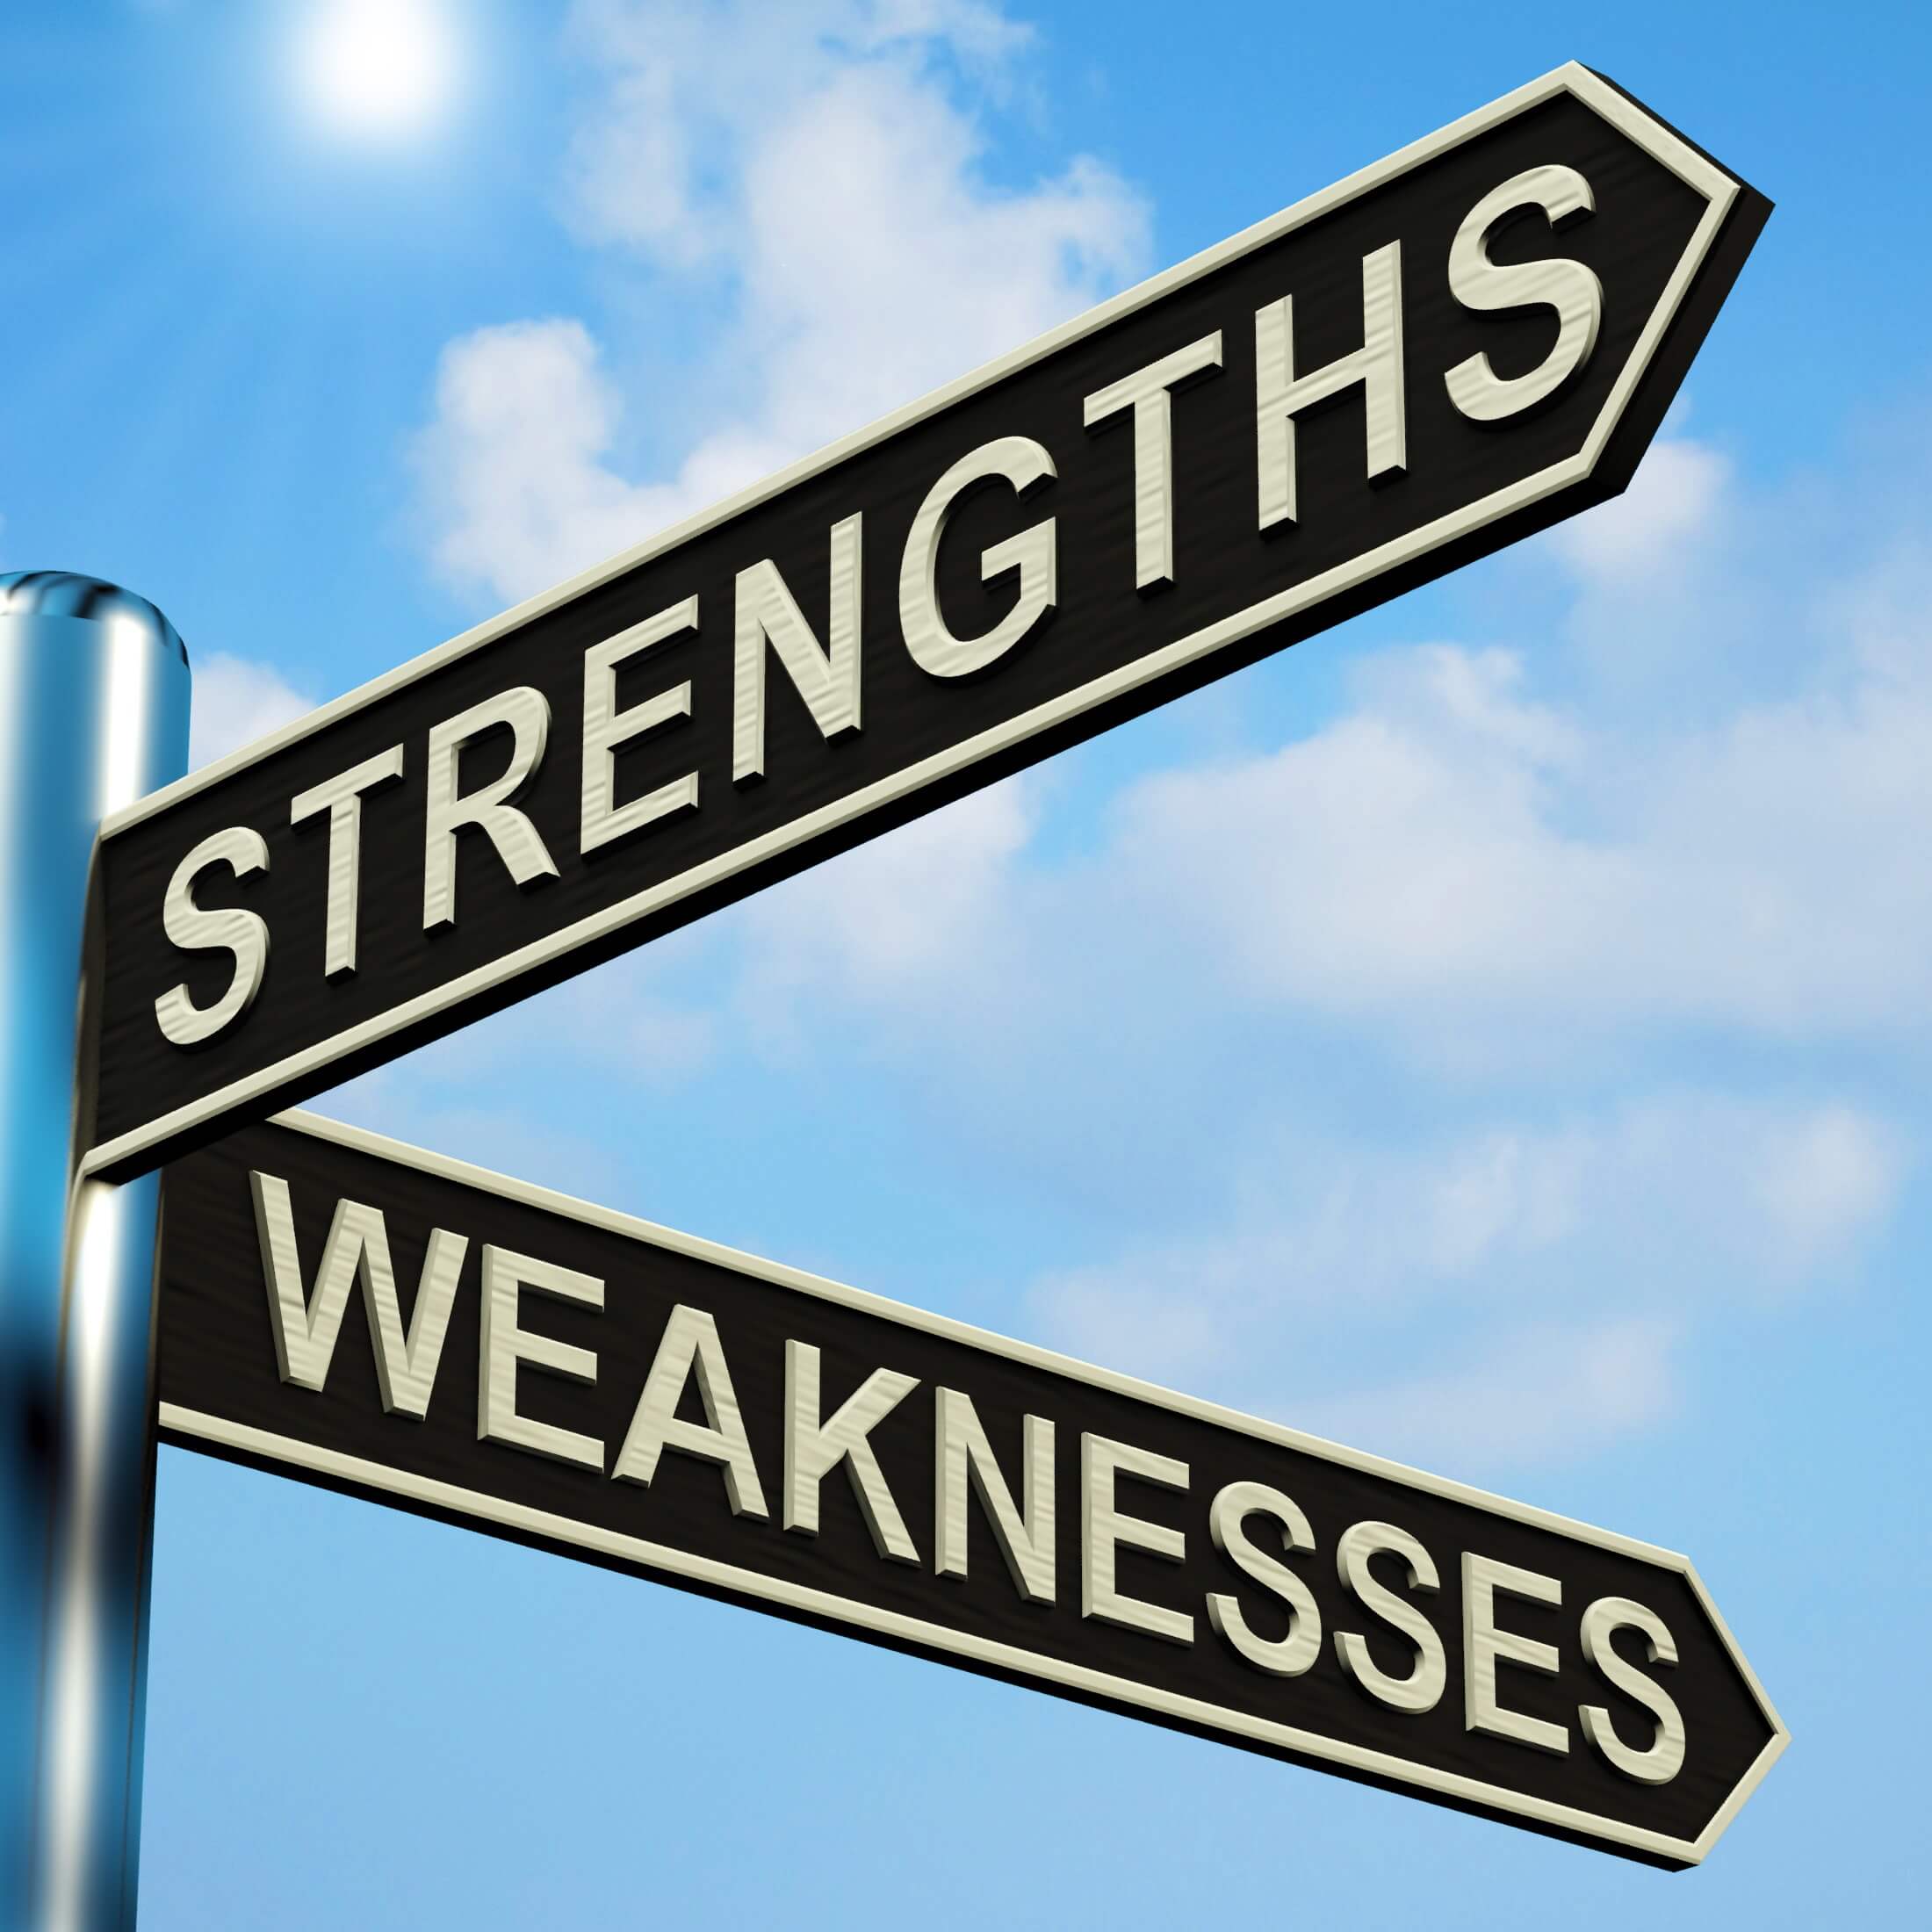 Strengths and weaknesses of leaders in science